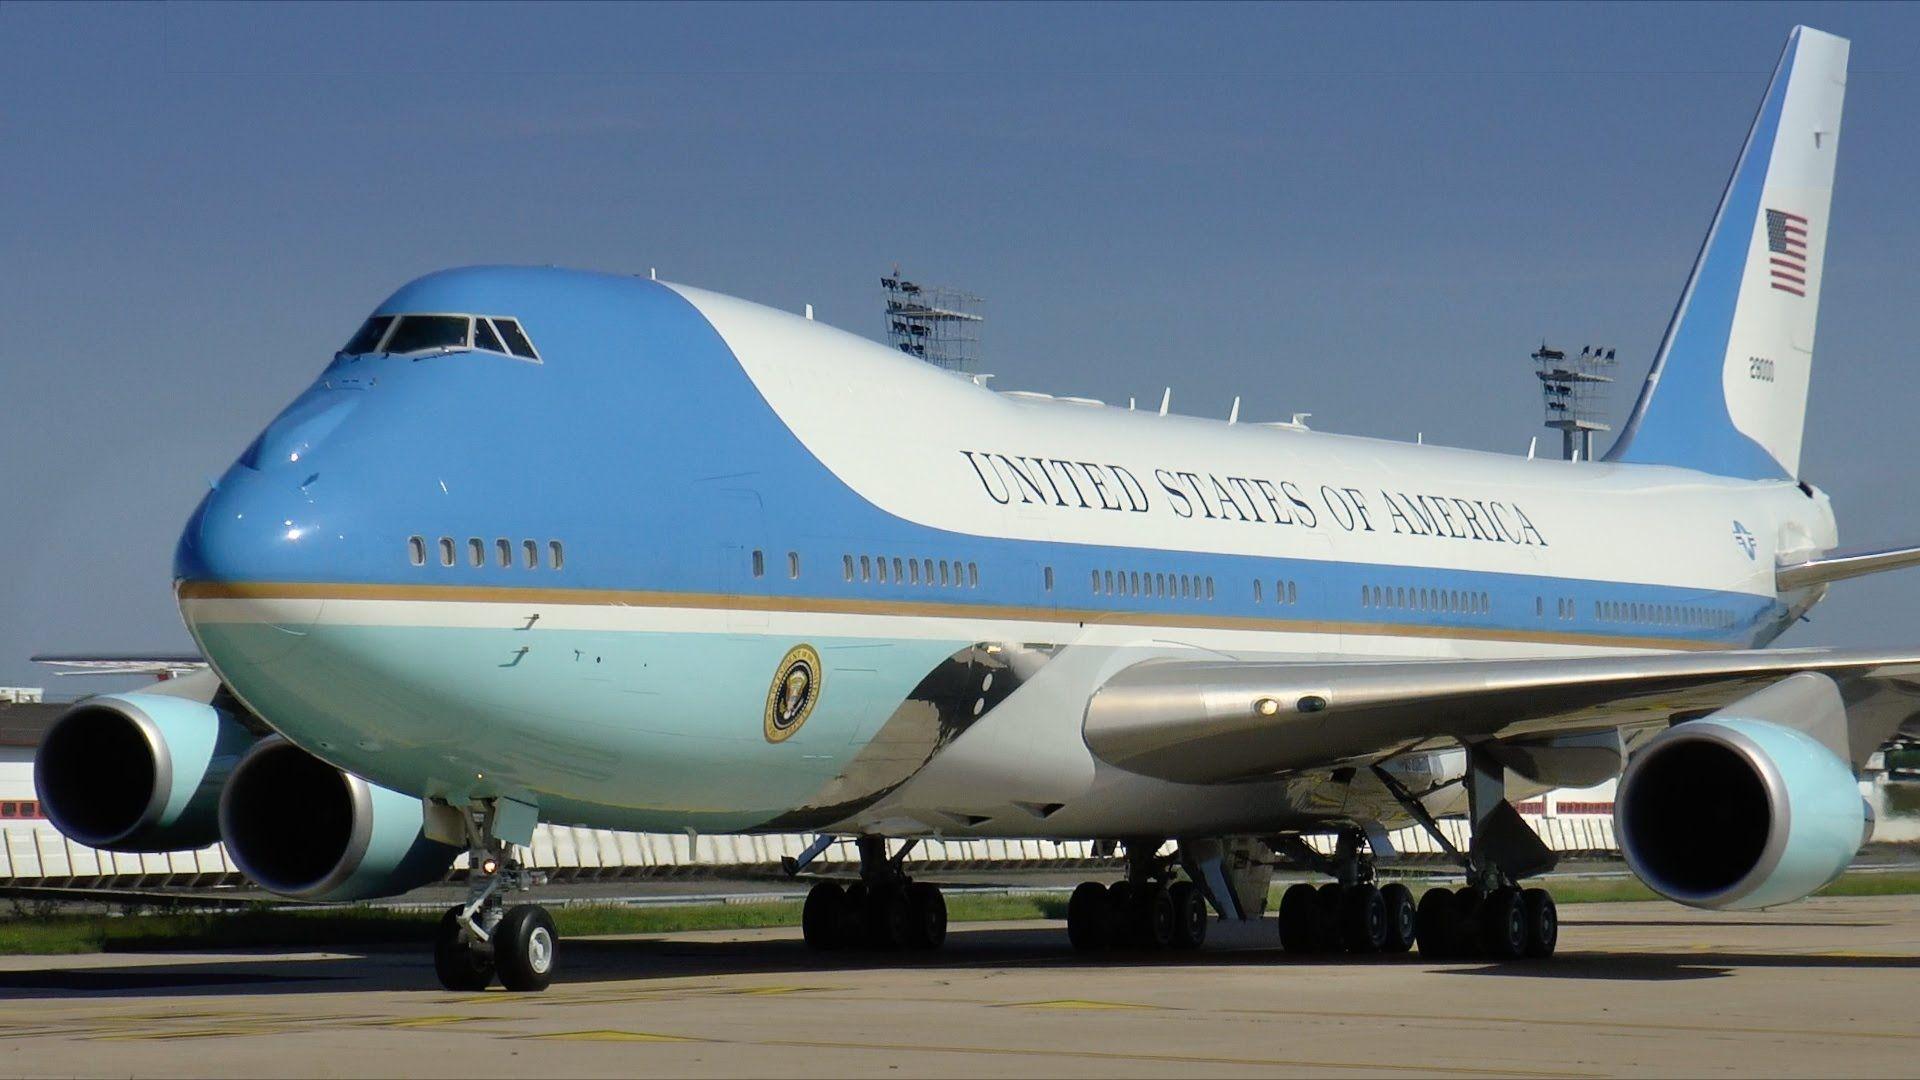 Download Air Force One Plane Wallpaper 59527 1920x1080 px High